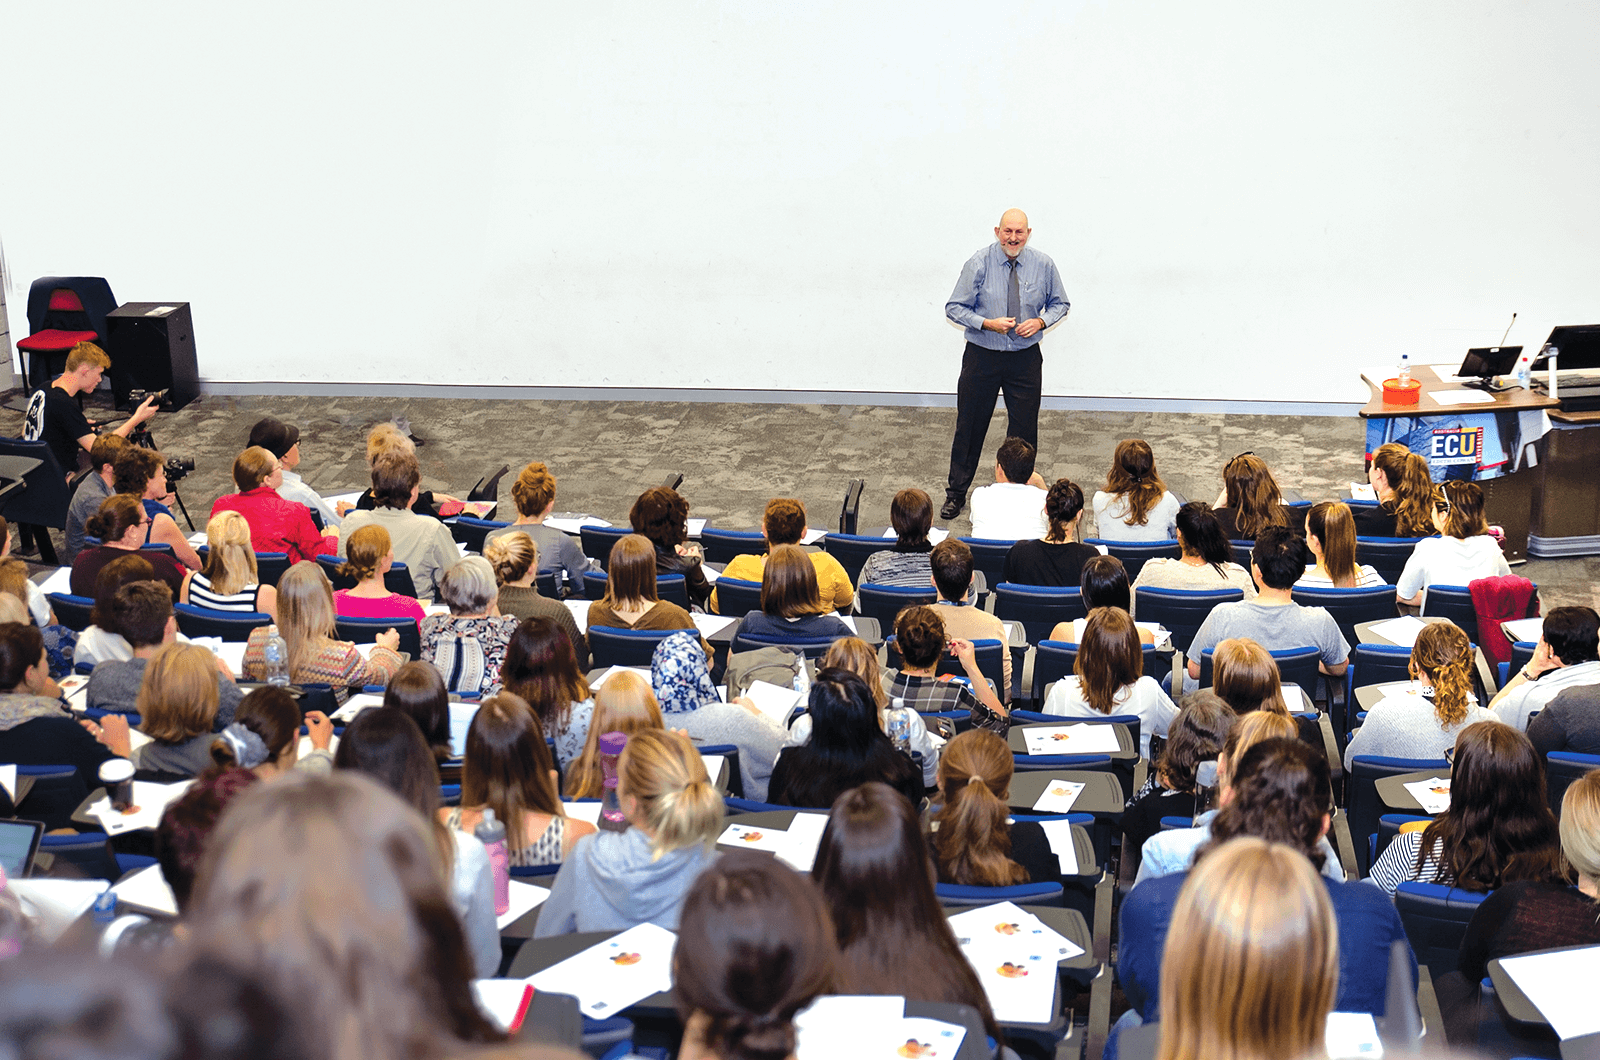 Peter Dhu gives a presentation to 250 speech pathologists and speech pathology students at Edith Cowan University in October 2017. Photo by Pille Repnau